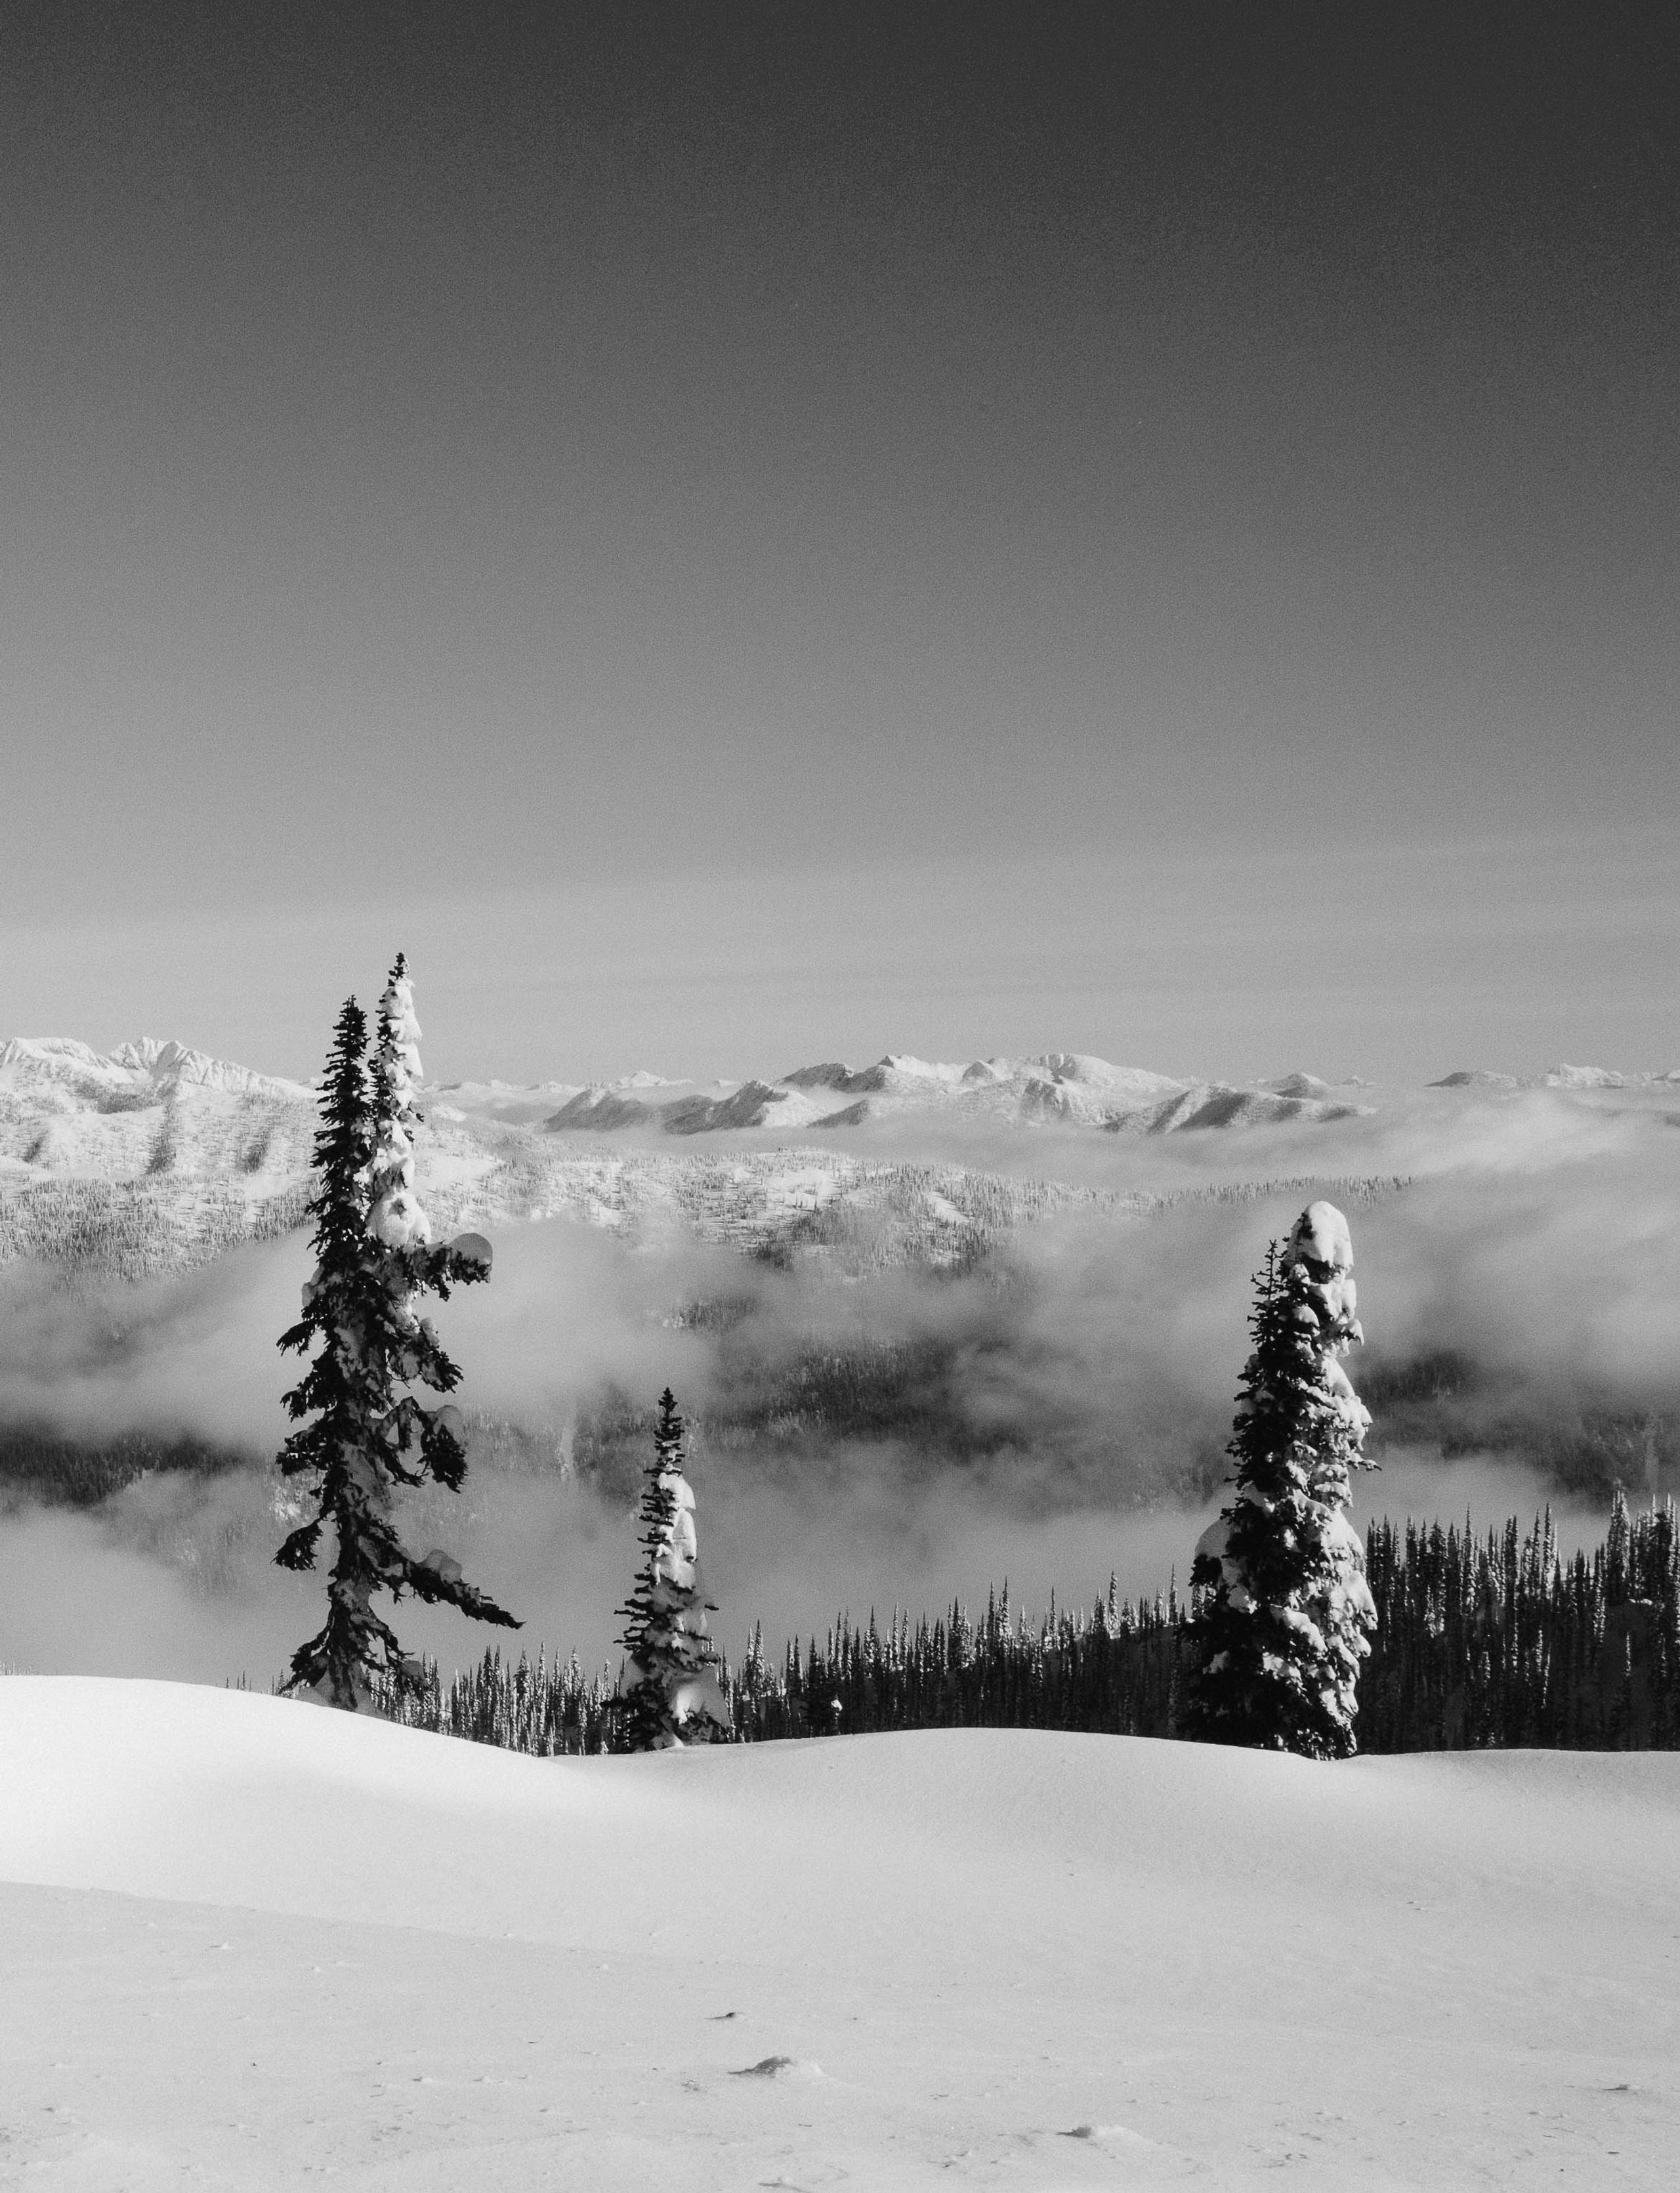 Black and white photo of snowy Alaskan landscape with pine trees and mountain range in the distance